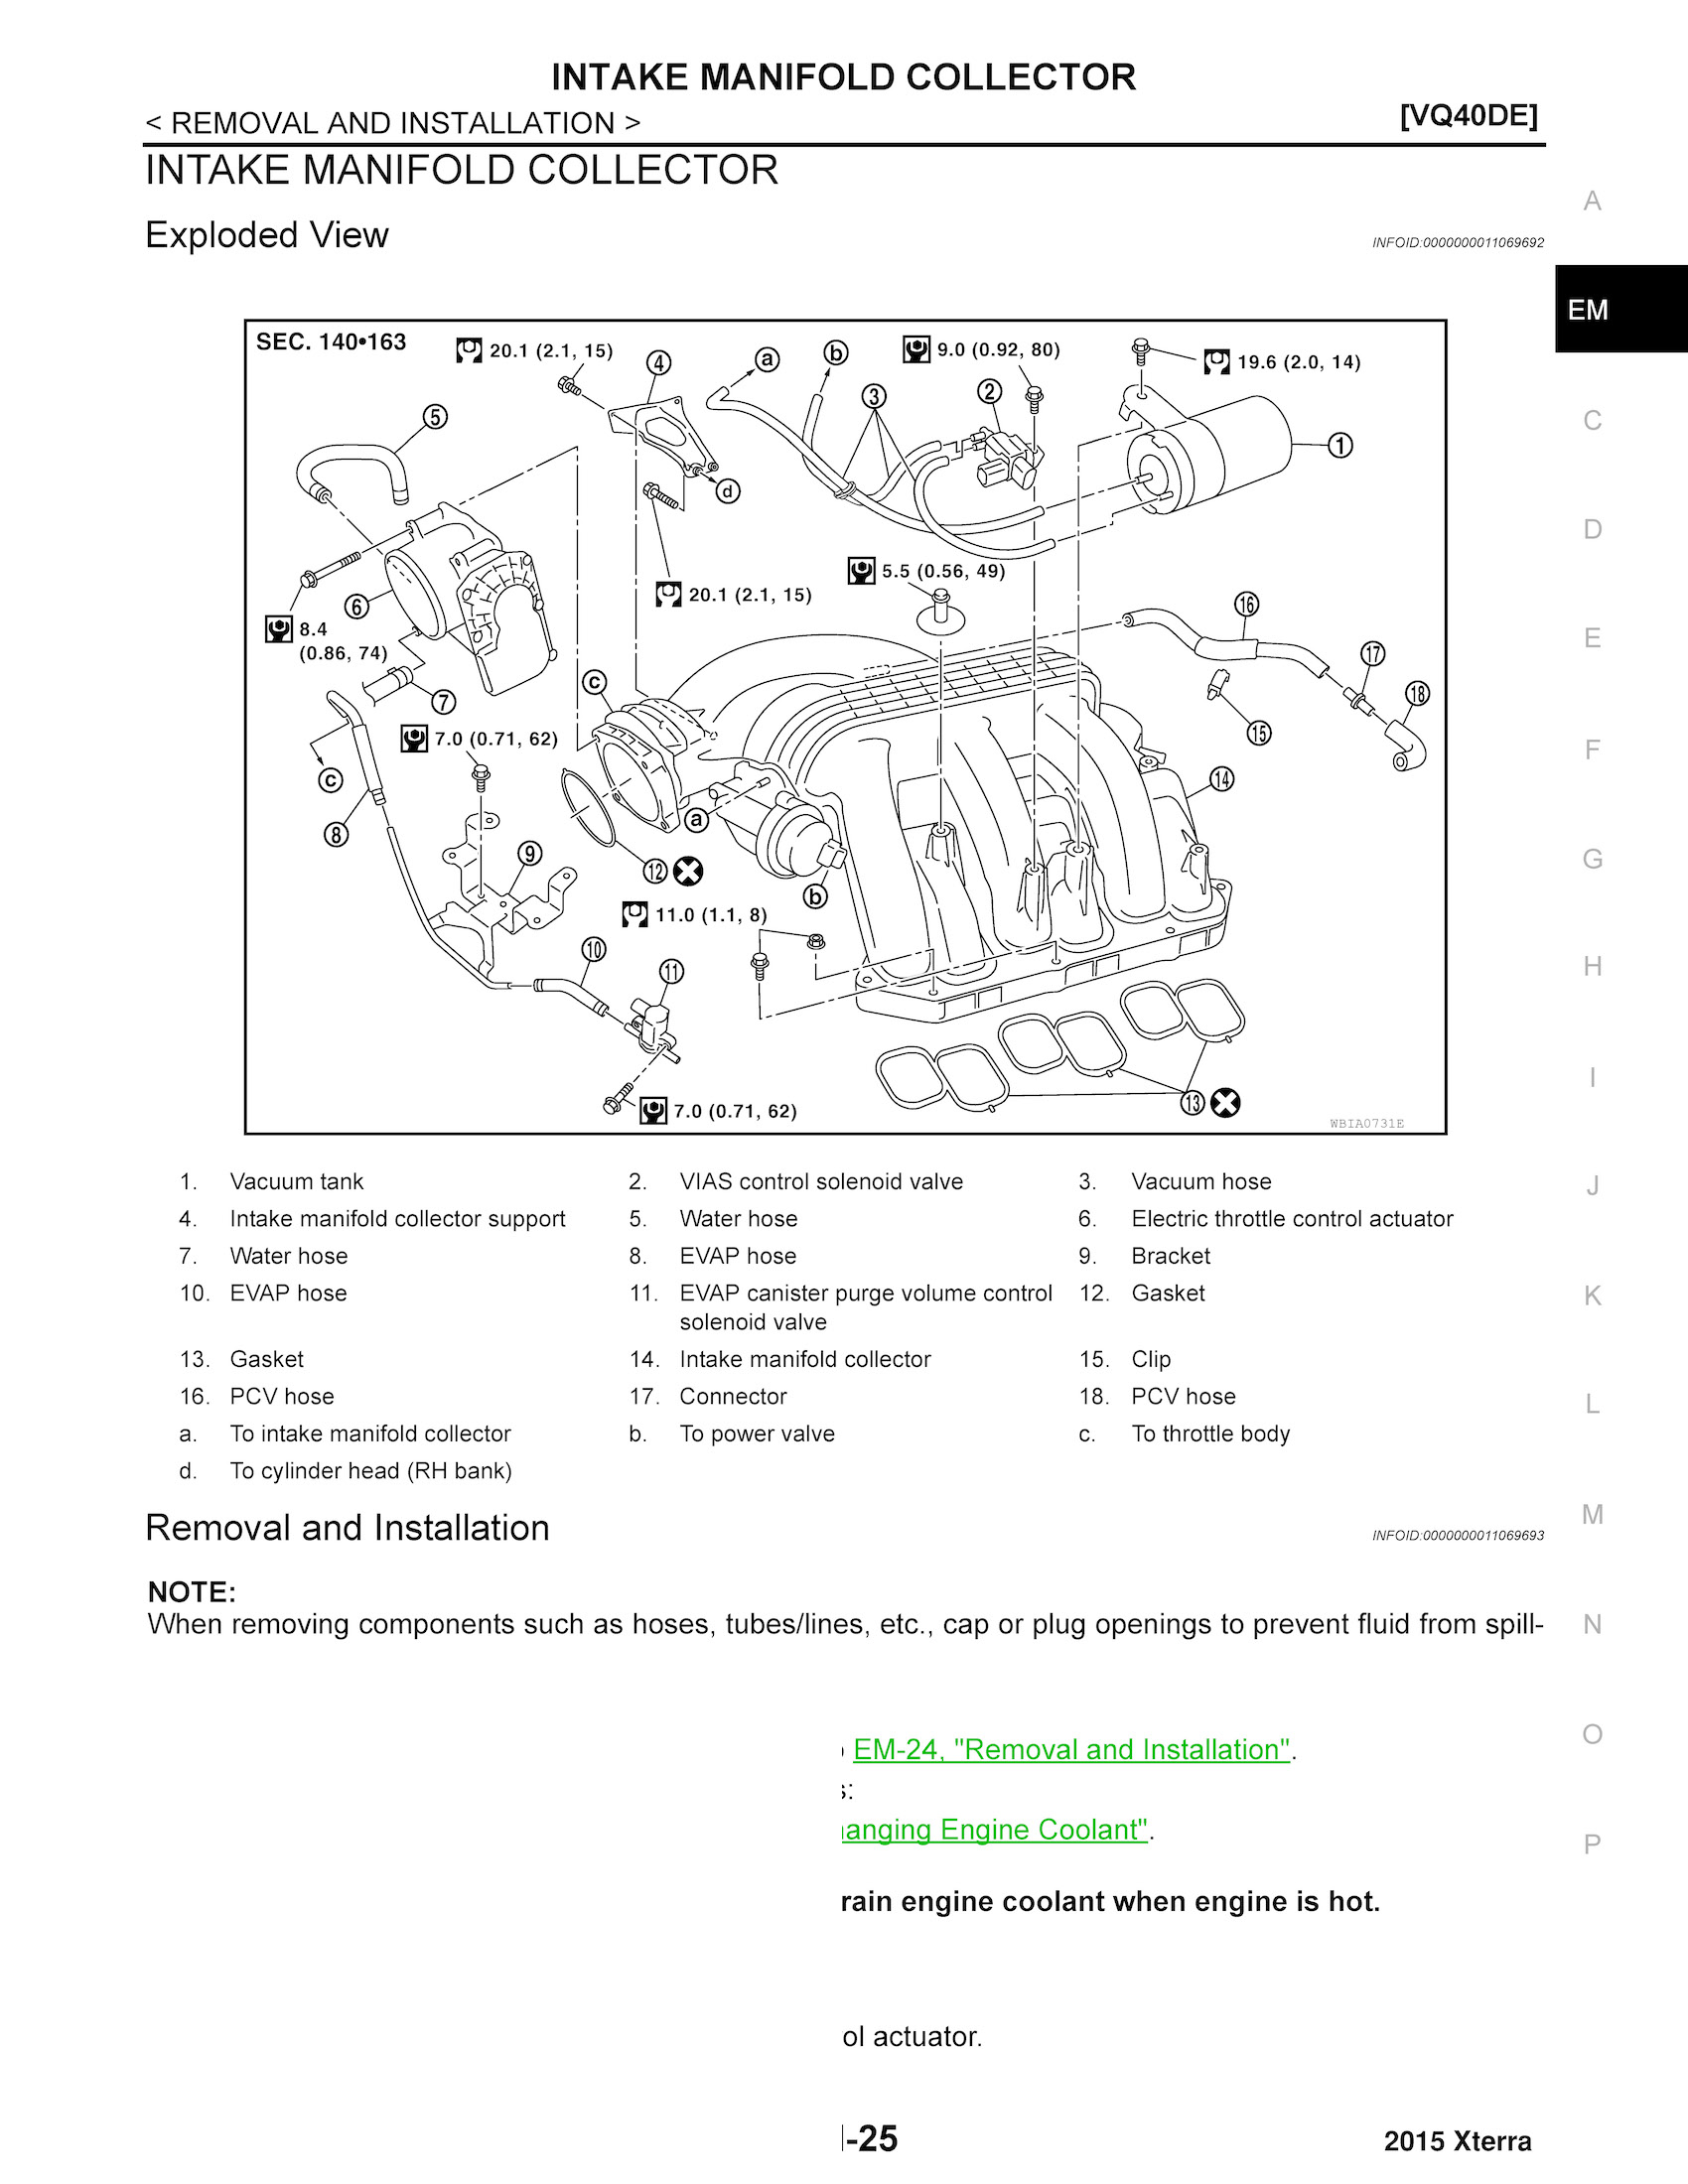 2015 Nissan Xterra Repair Manual, Intake Manifold Collector Removal and Installation